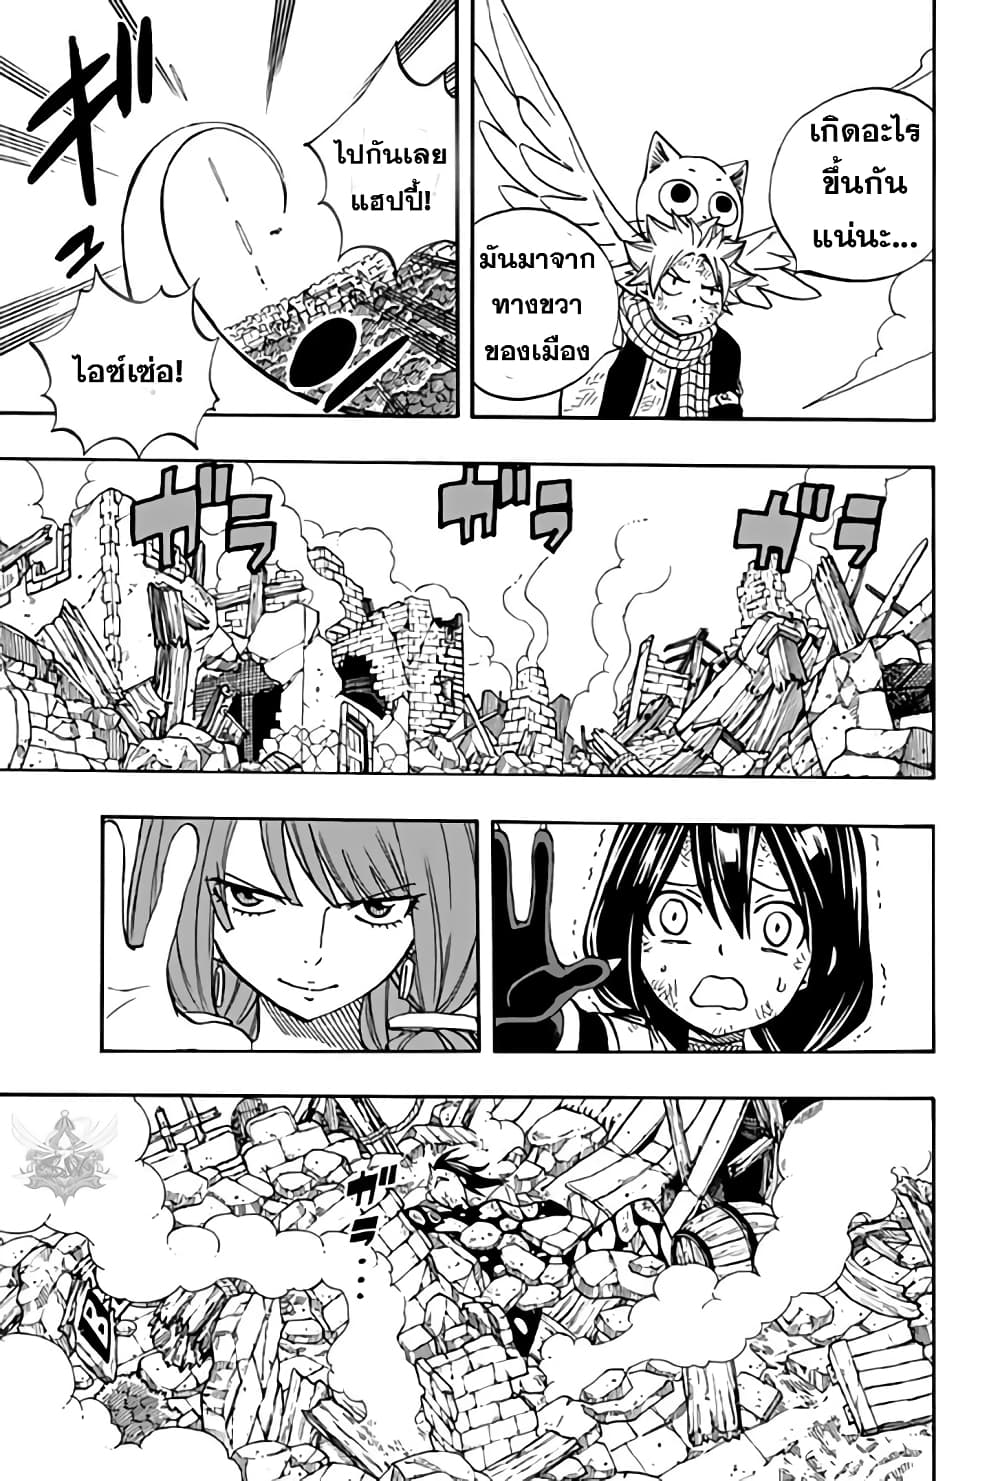 Fairy Tail: 100 Years Quest 48 TH